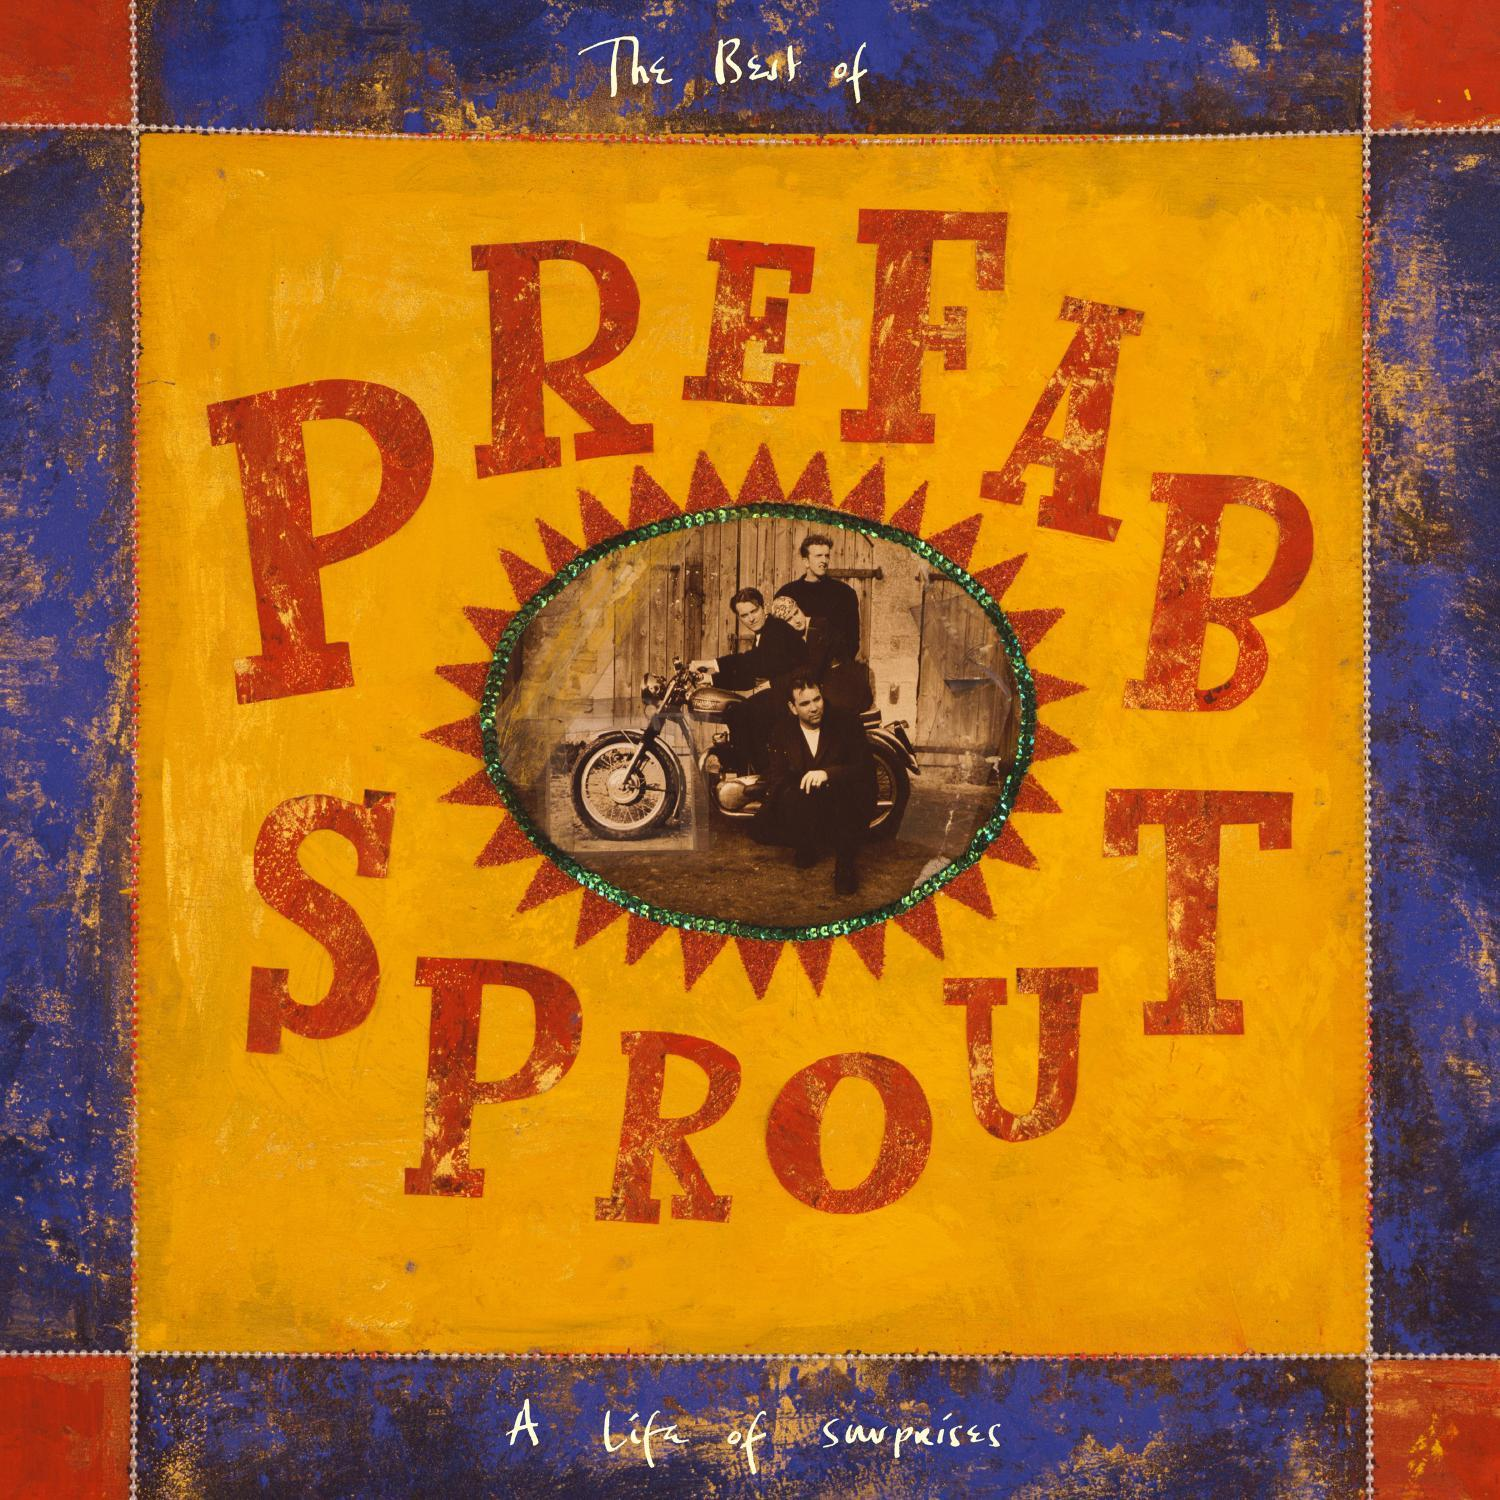 Prefab Sprout - (Remastered) (Vinyl) Surprises Life - A of